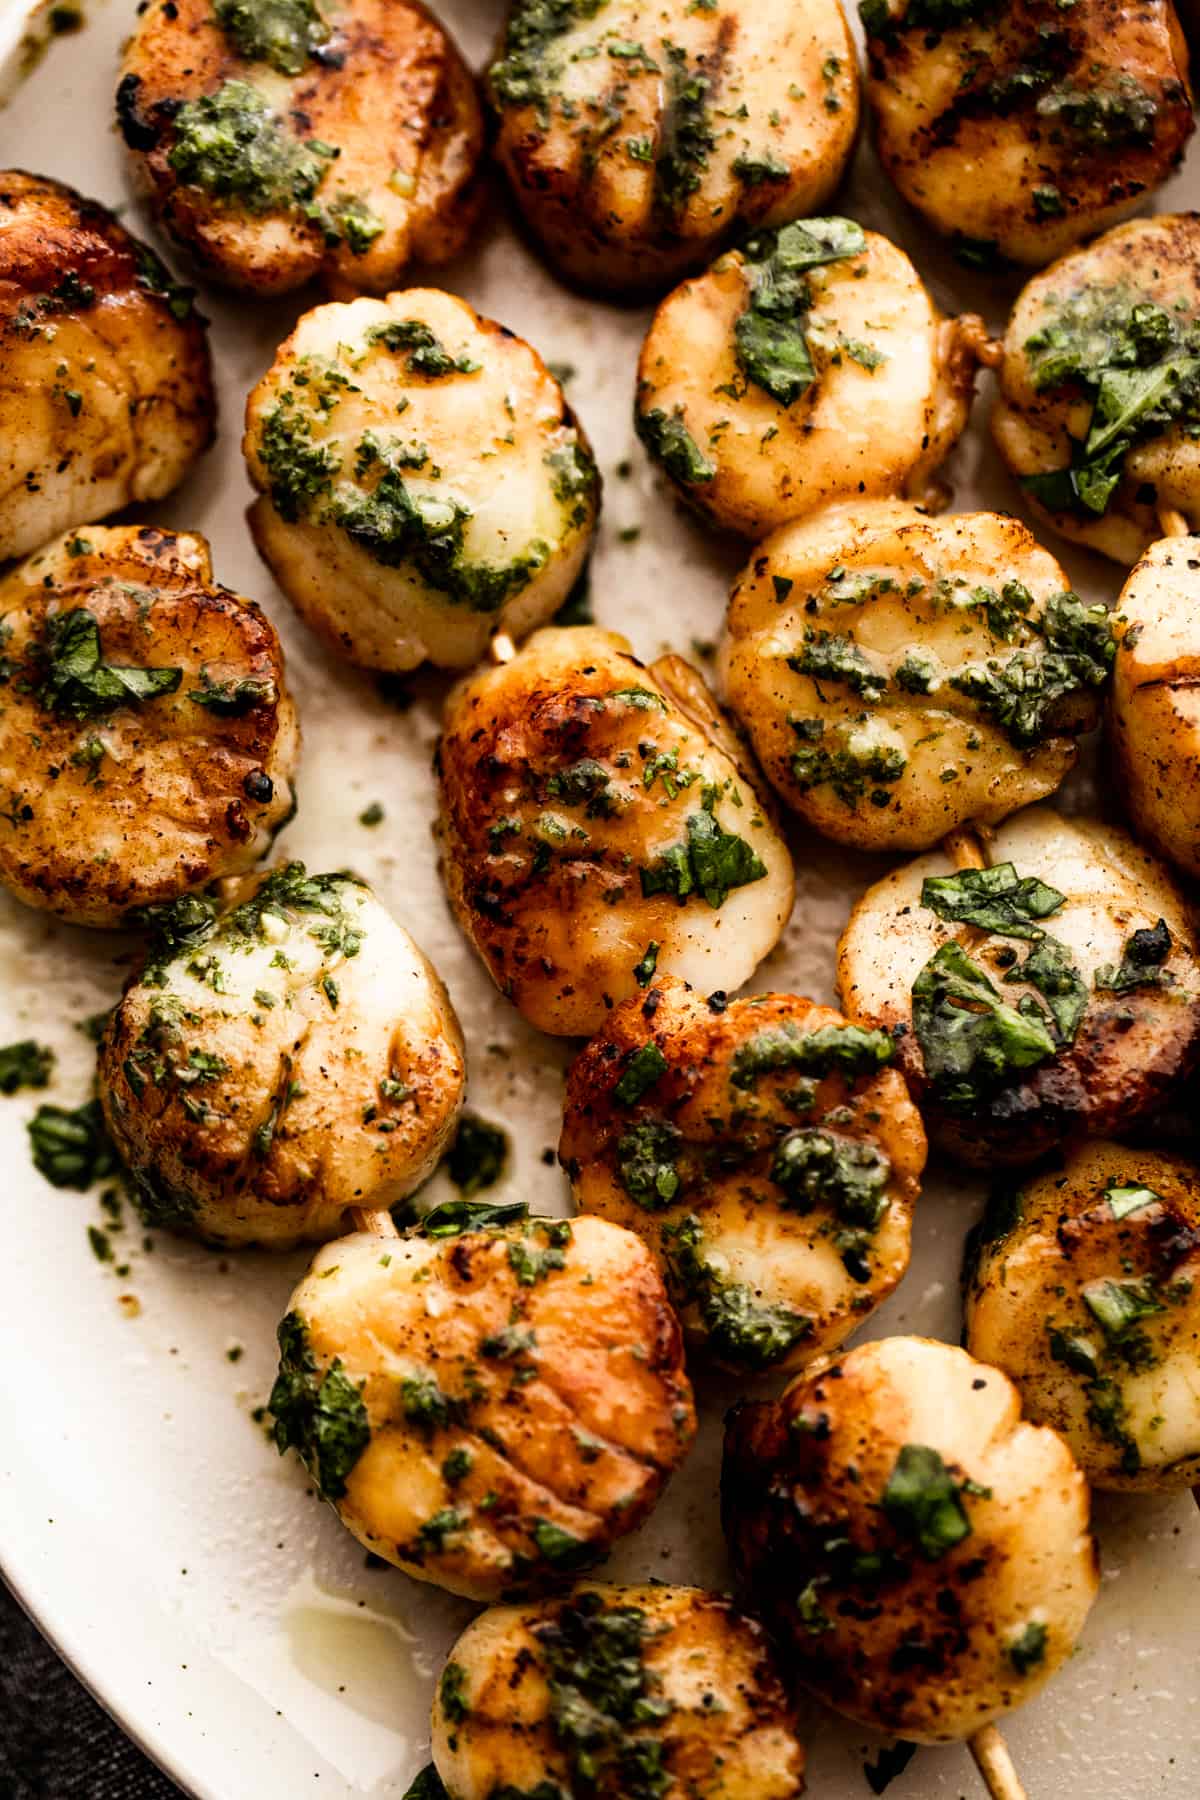 Closeup image of grilled scallop skewers on a plate with basil garlic dressing.